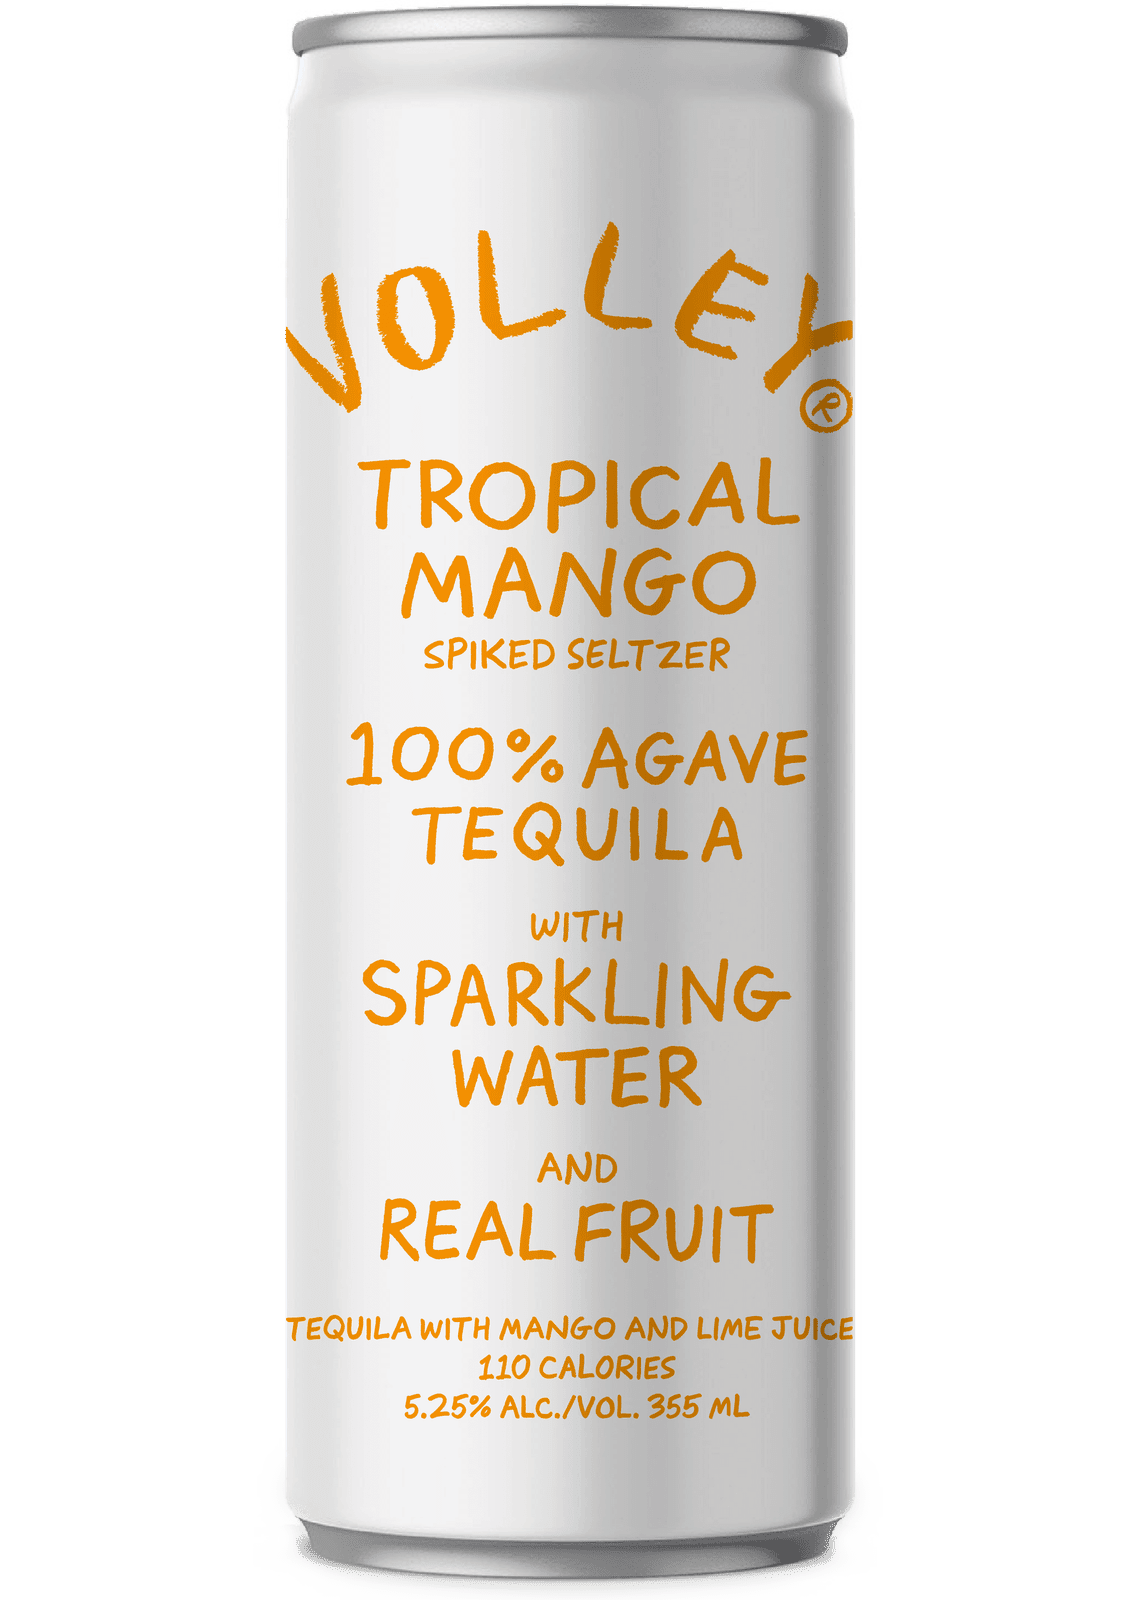 VOLLEY TEQUILA SELTZER Tropical Mango